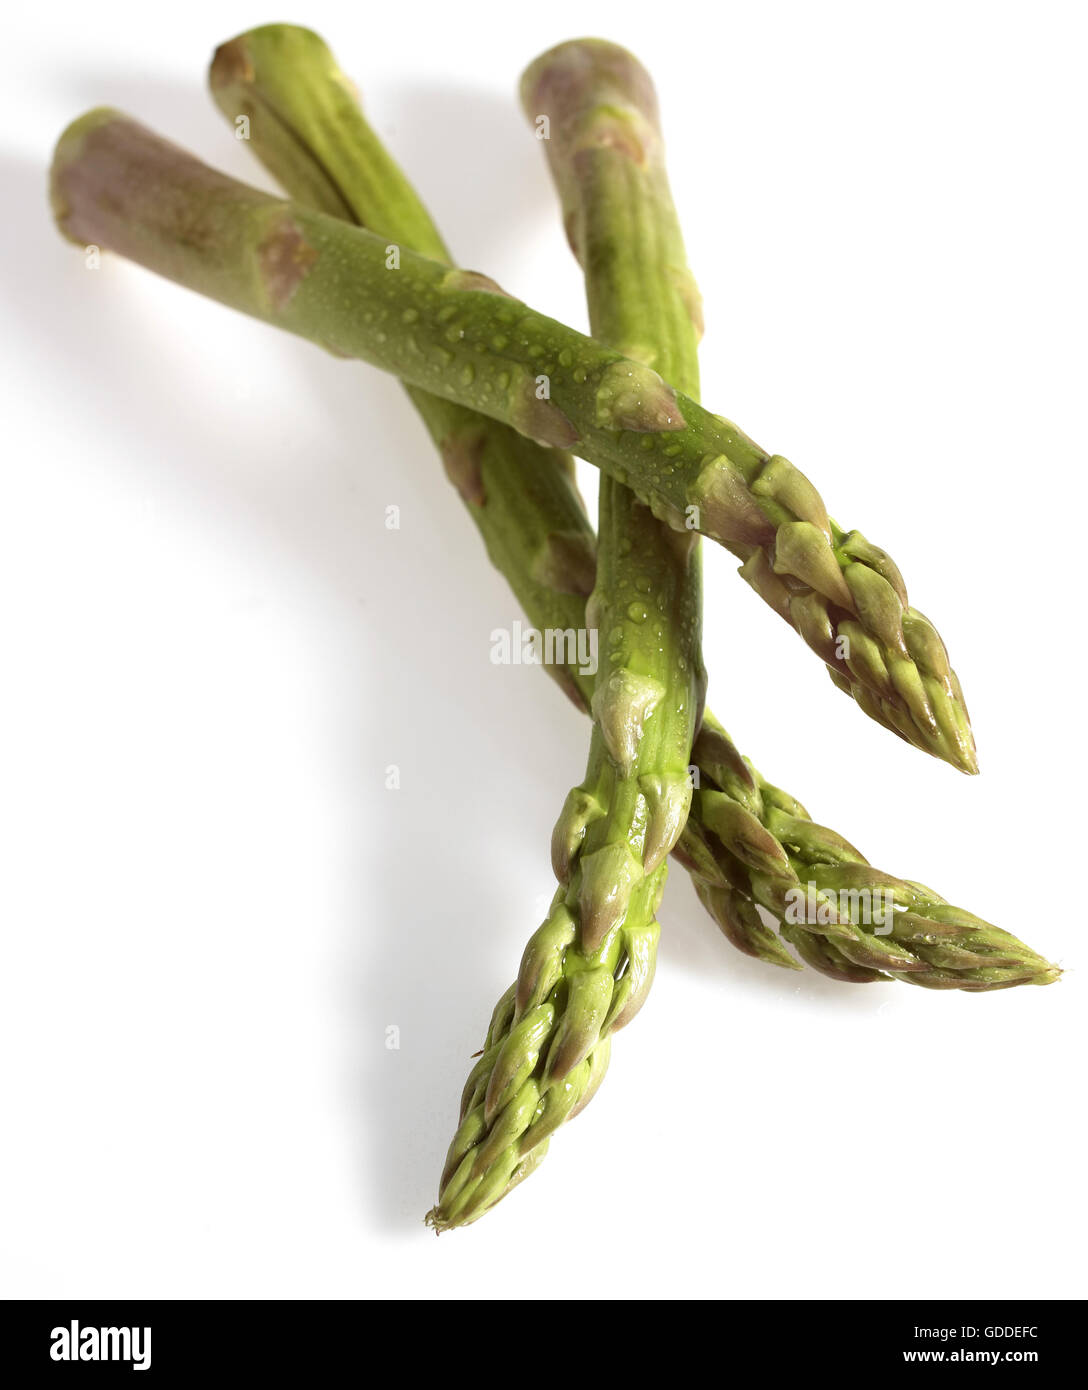 Green Asparagus, asparagus officinalis, Vegetables against White Background Stock Photo